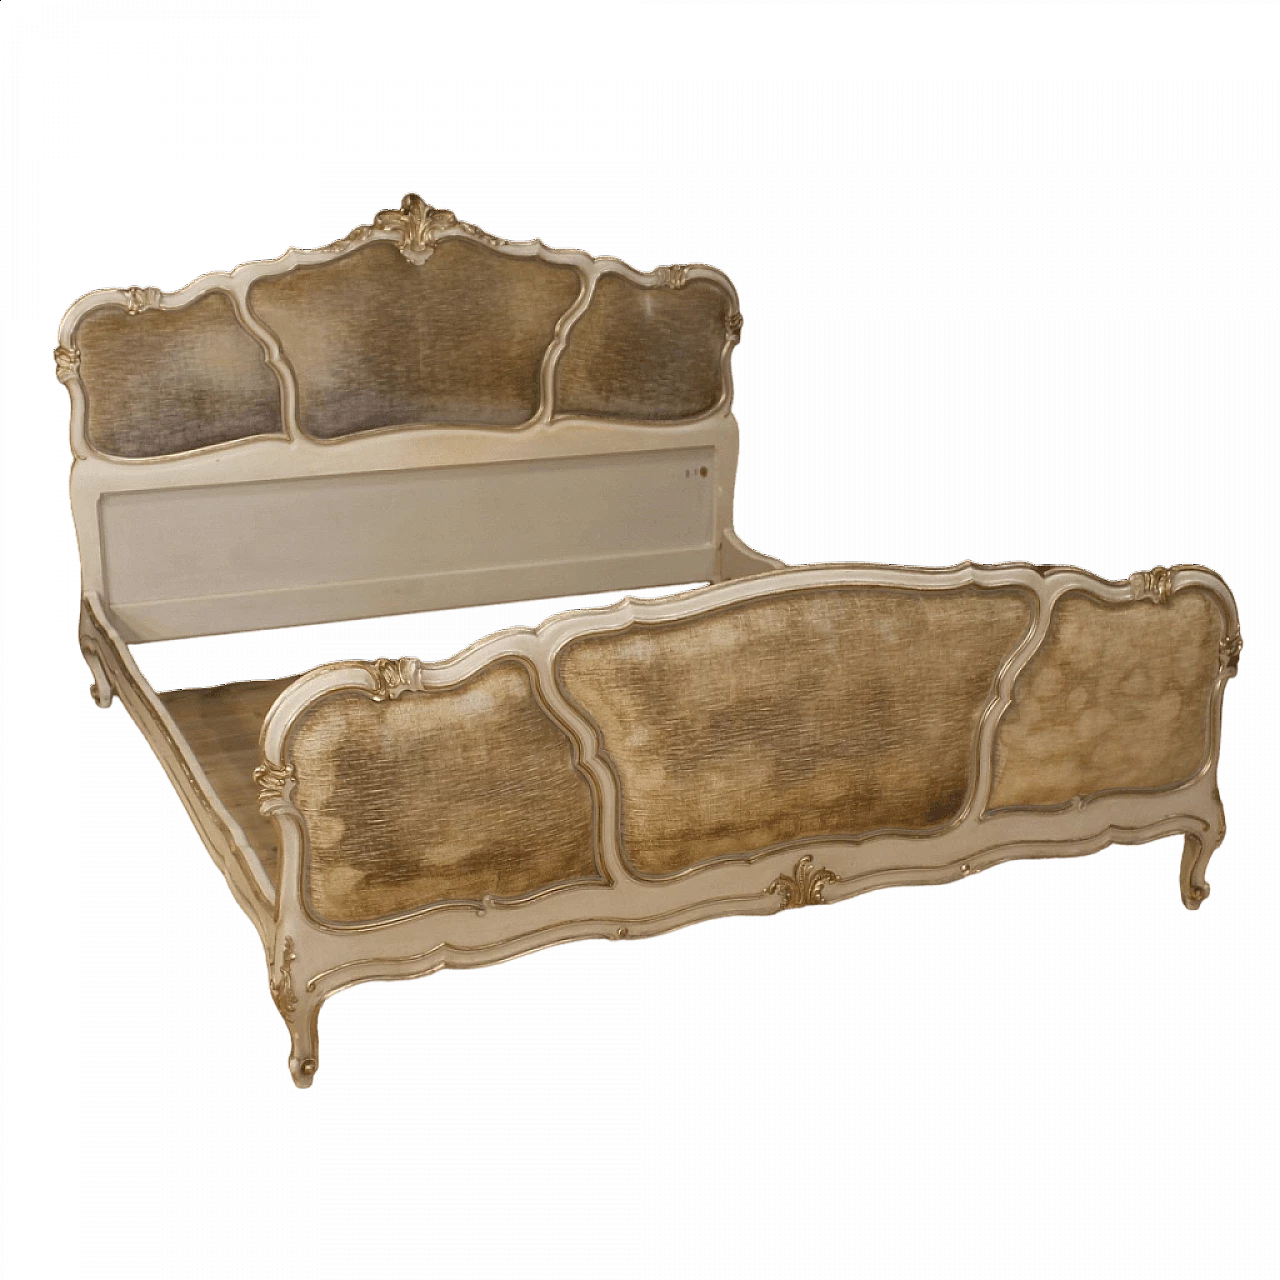 Venetian lacquered and silver wood double bed with velvet inserts 13